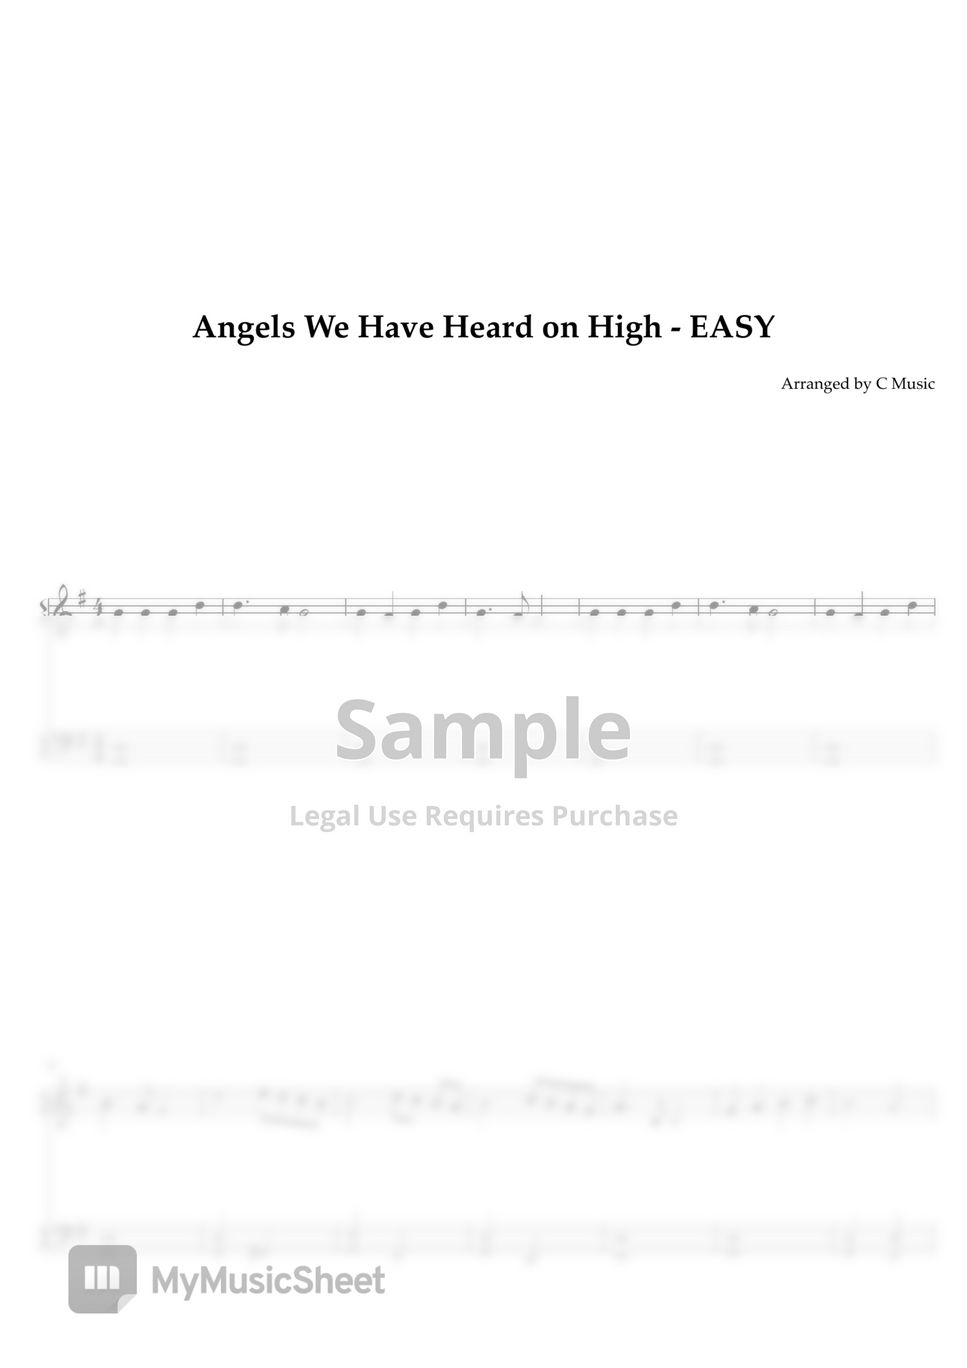 Traditional Carol - Angels We Have Heard on High (Easy Version) by C Music